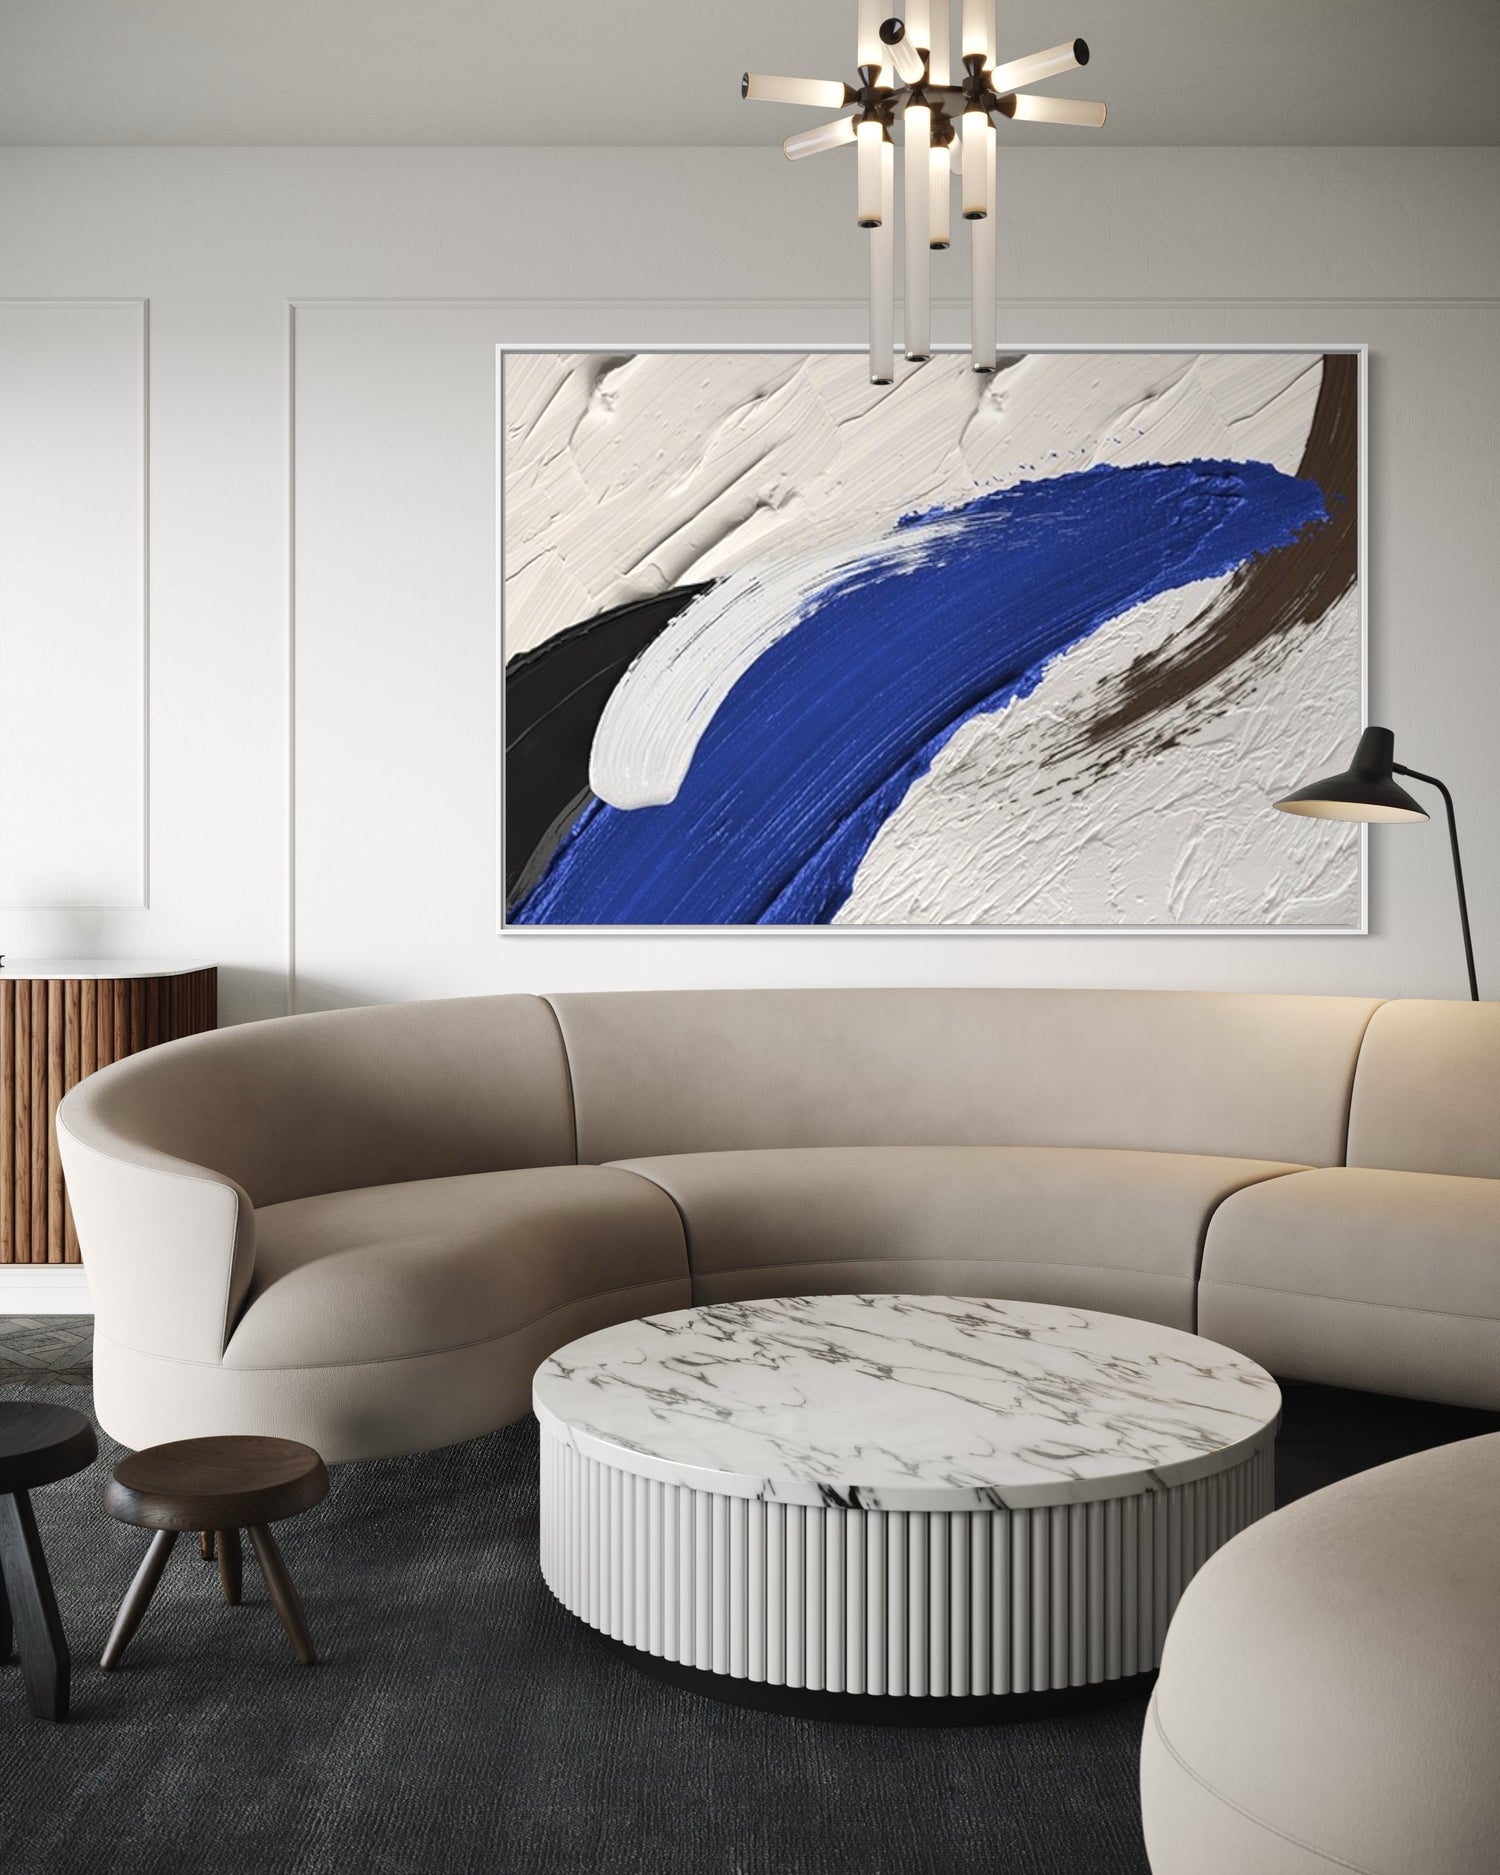 Textured Blue and White Wall Art